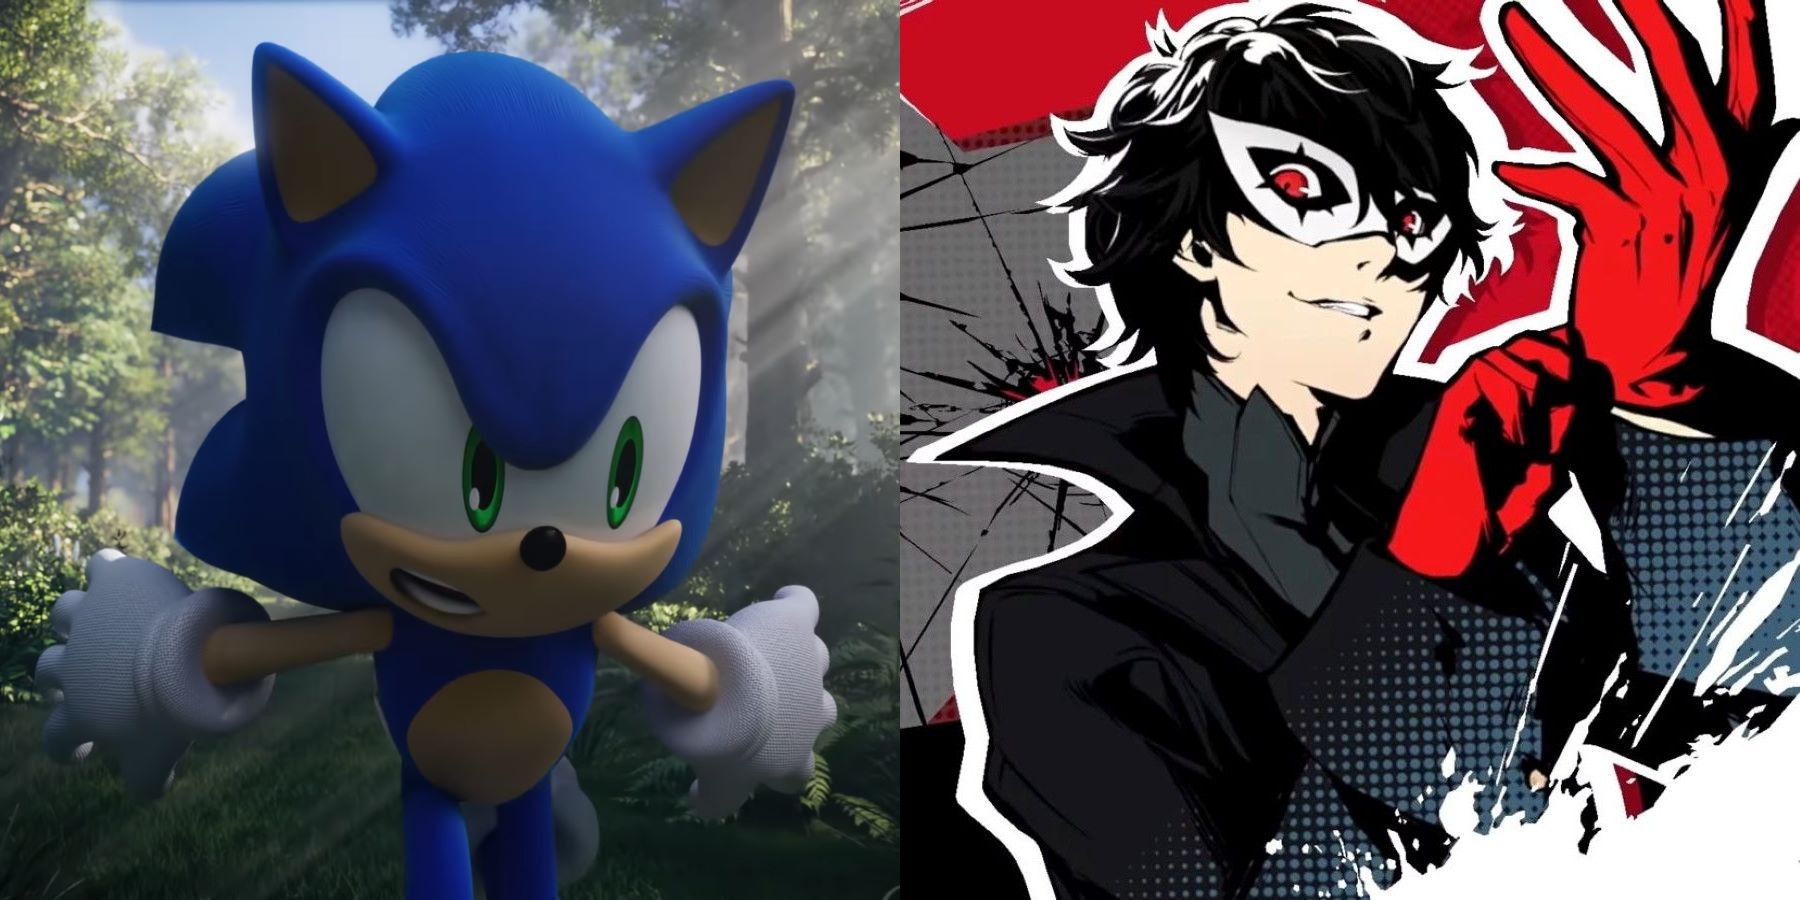 Sonic the Hedgehog in Sonic Frontiers and Persona 5's Joker